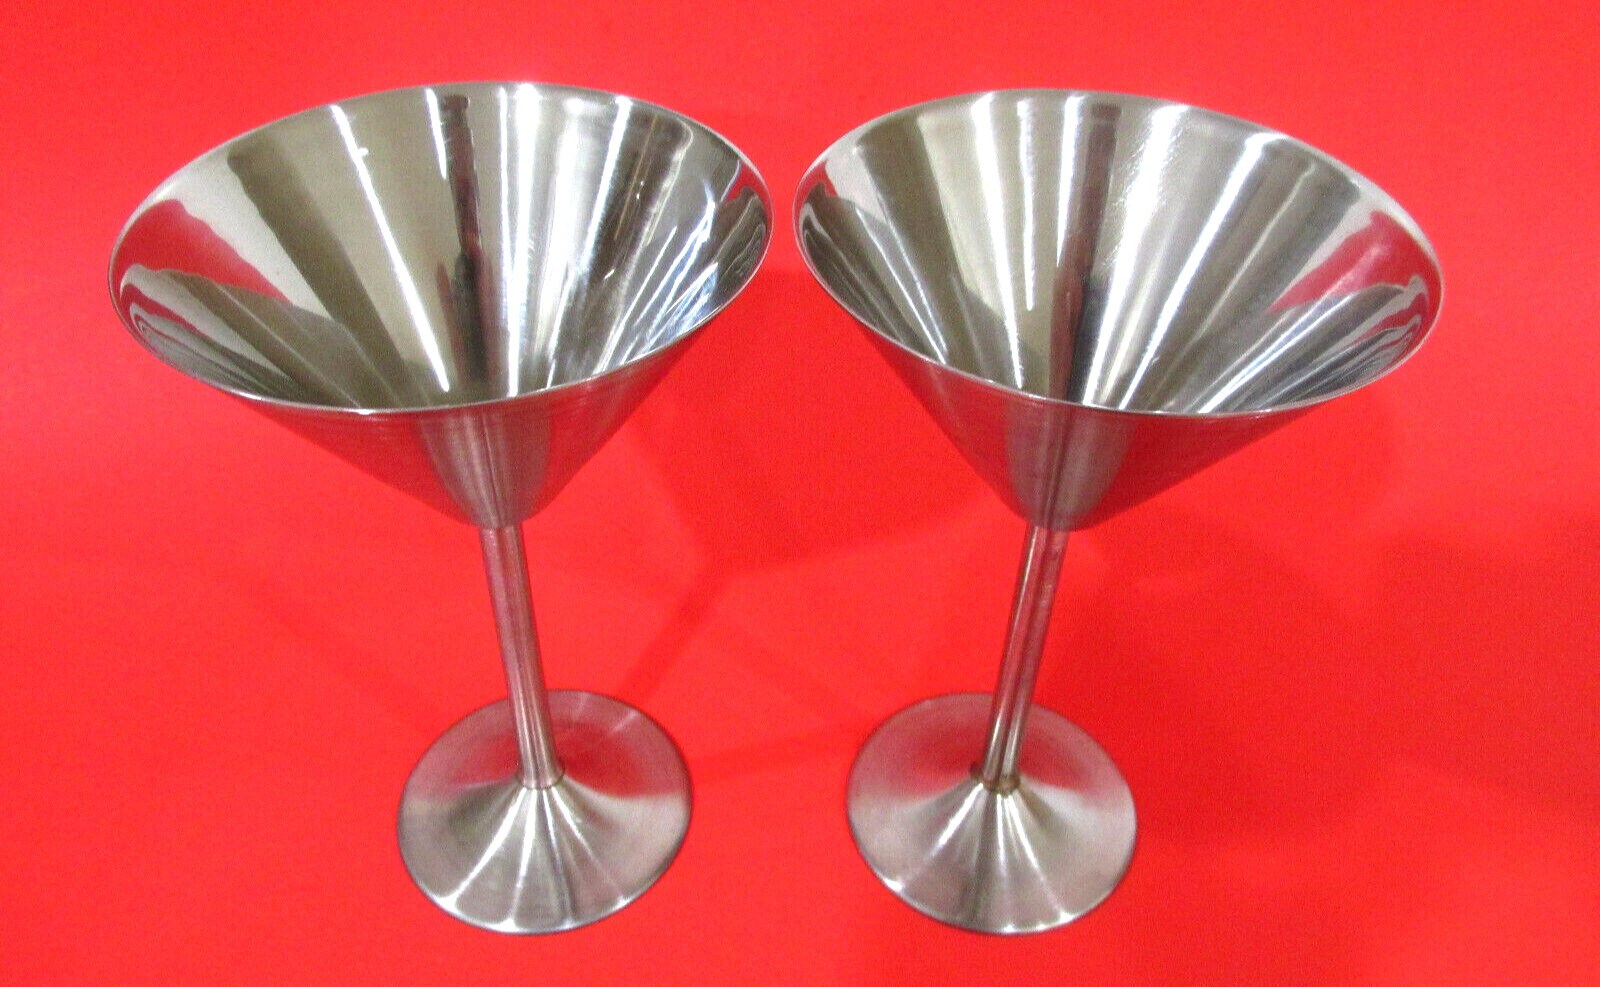 Unbreakable Classic Stainless Steel Martini Glasses 7 